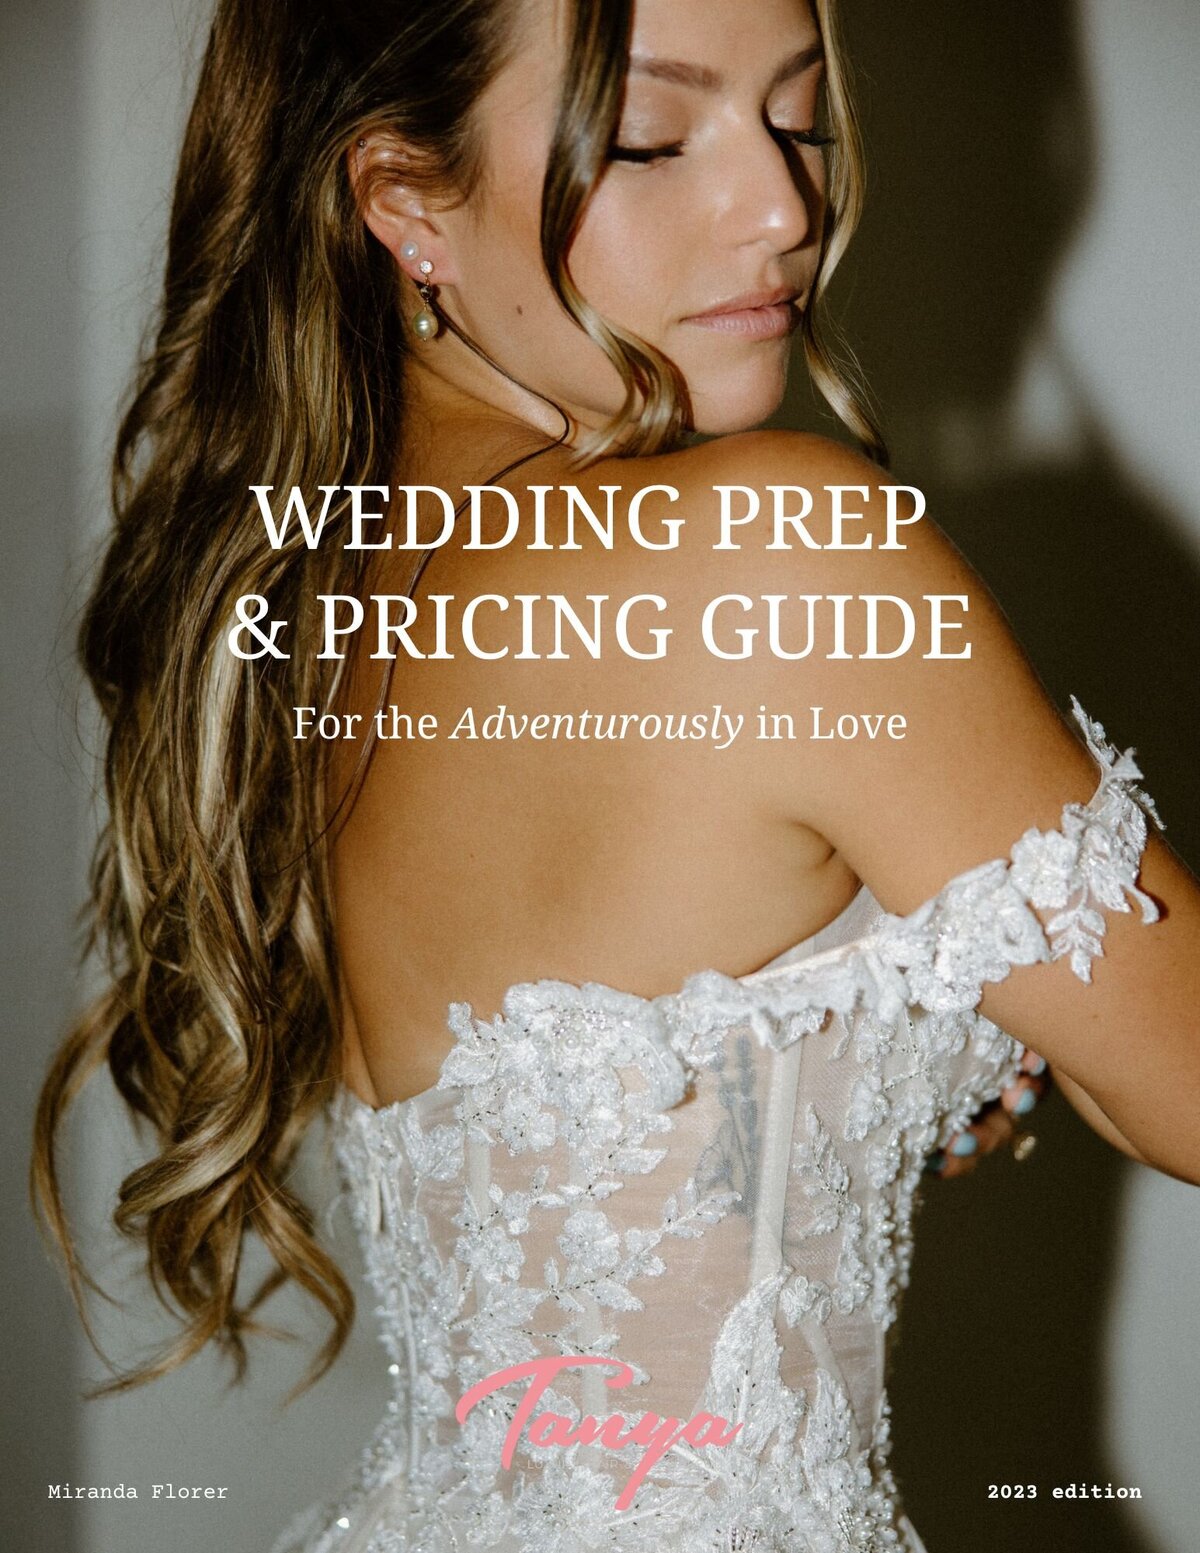 Sonia Roselli Pricing & Welcome Guide